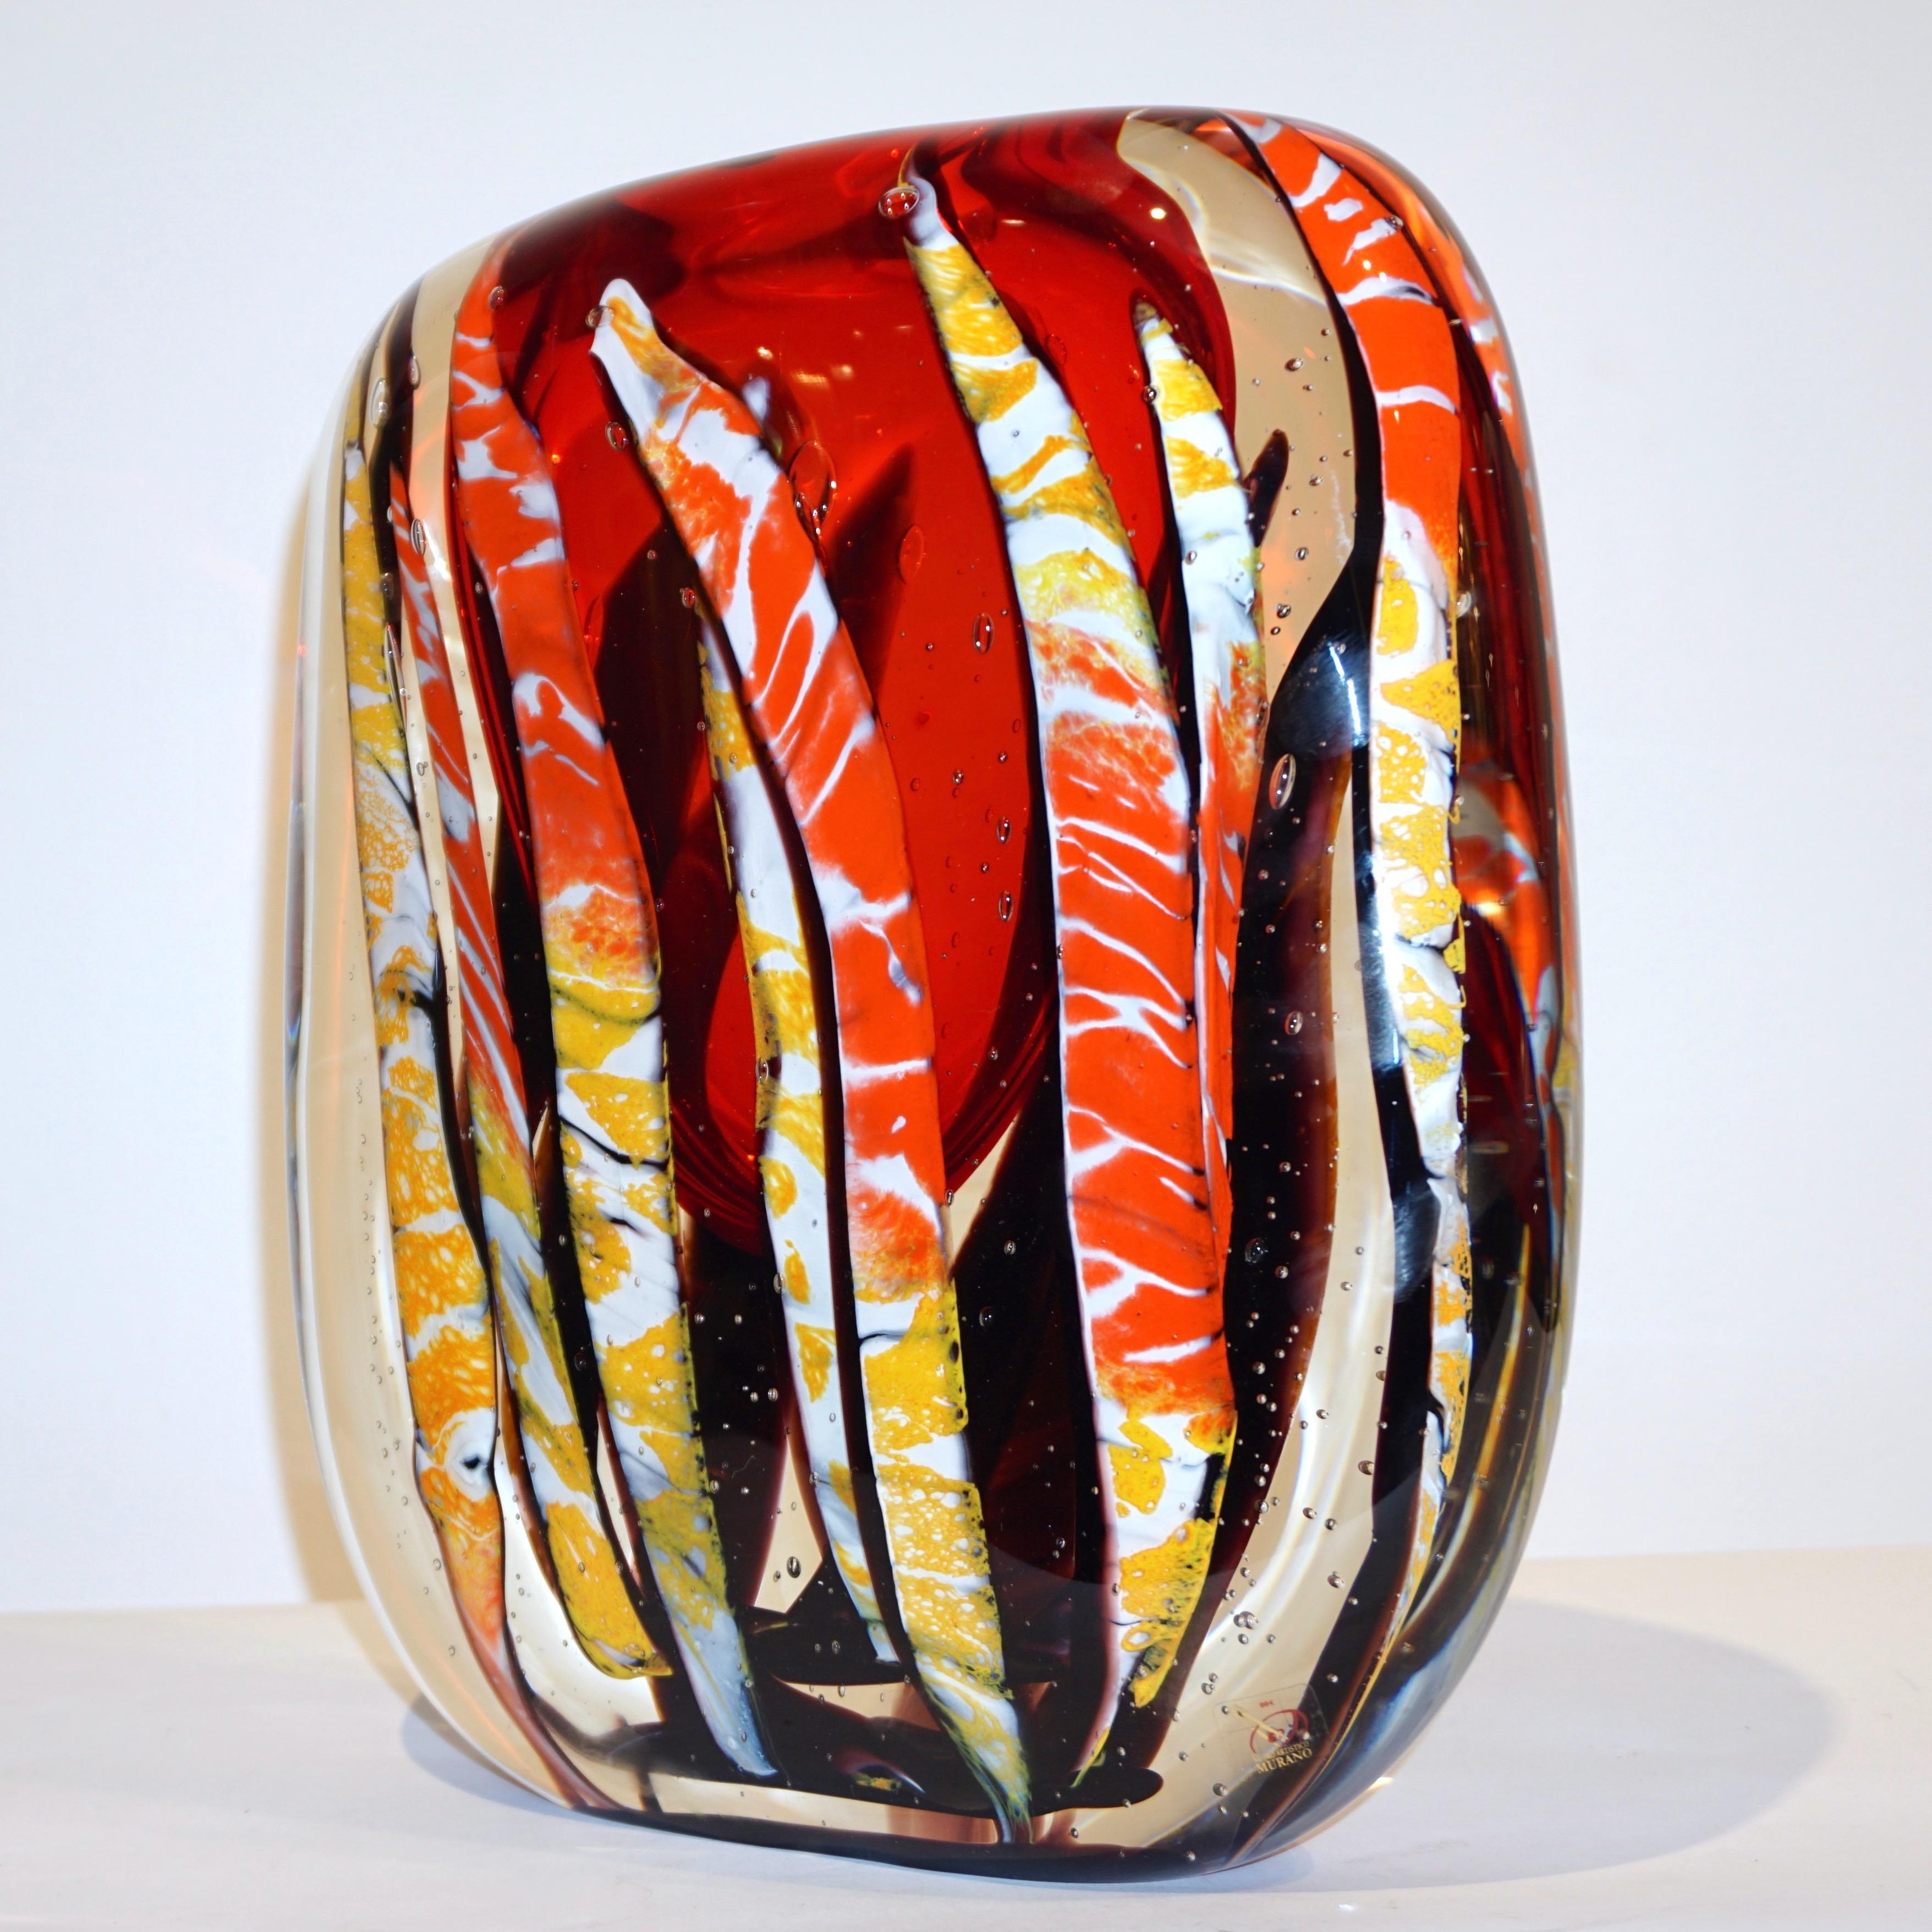 One of a kind Italian sculptural vase, substantial Work of Art in heavy blown Murano glass, signed by Cristian Onesto. The nature inspired marine life motif, captured in vibrant colors: red, yellow, black, ivory white... using a special sommerso